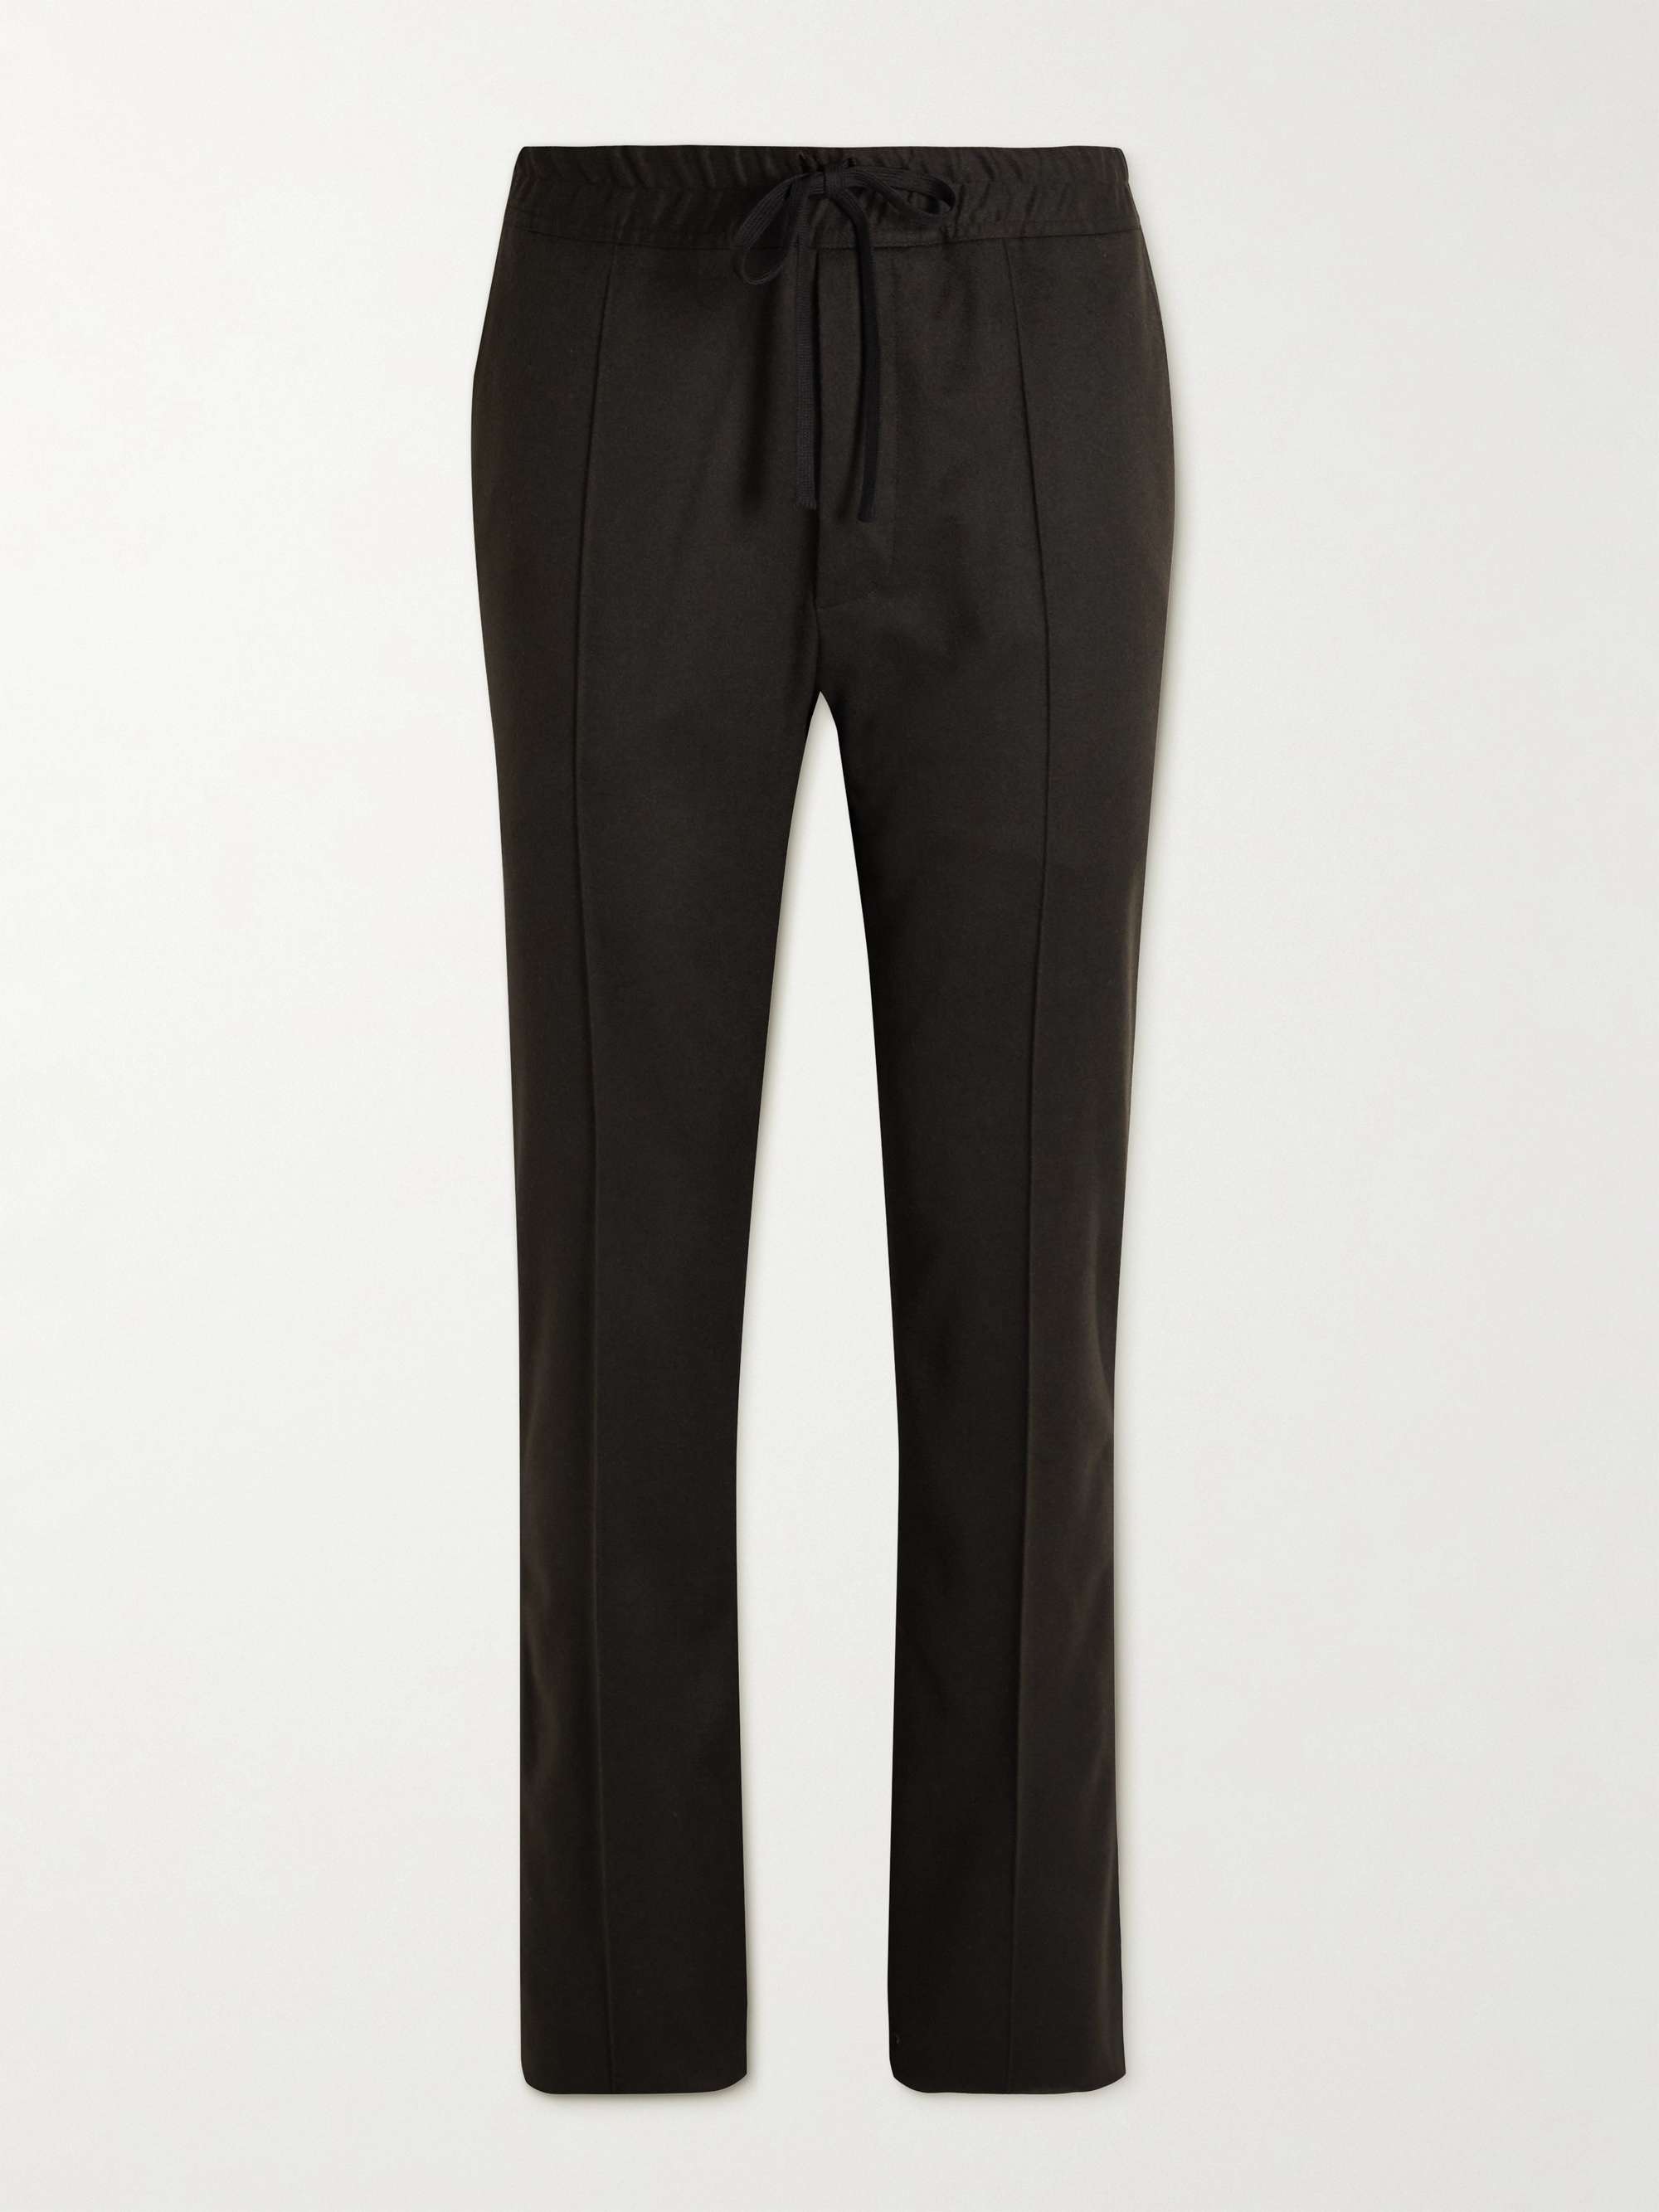 TOM FORD Slim-Fit Cashmere Drawstring Suit Trousers